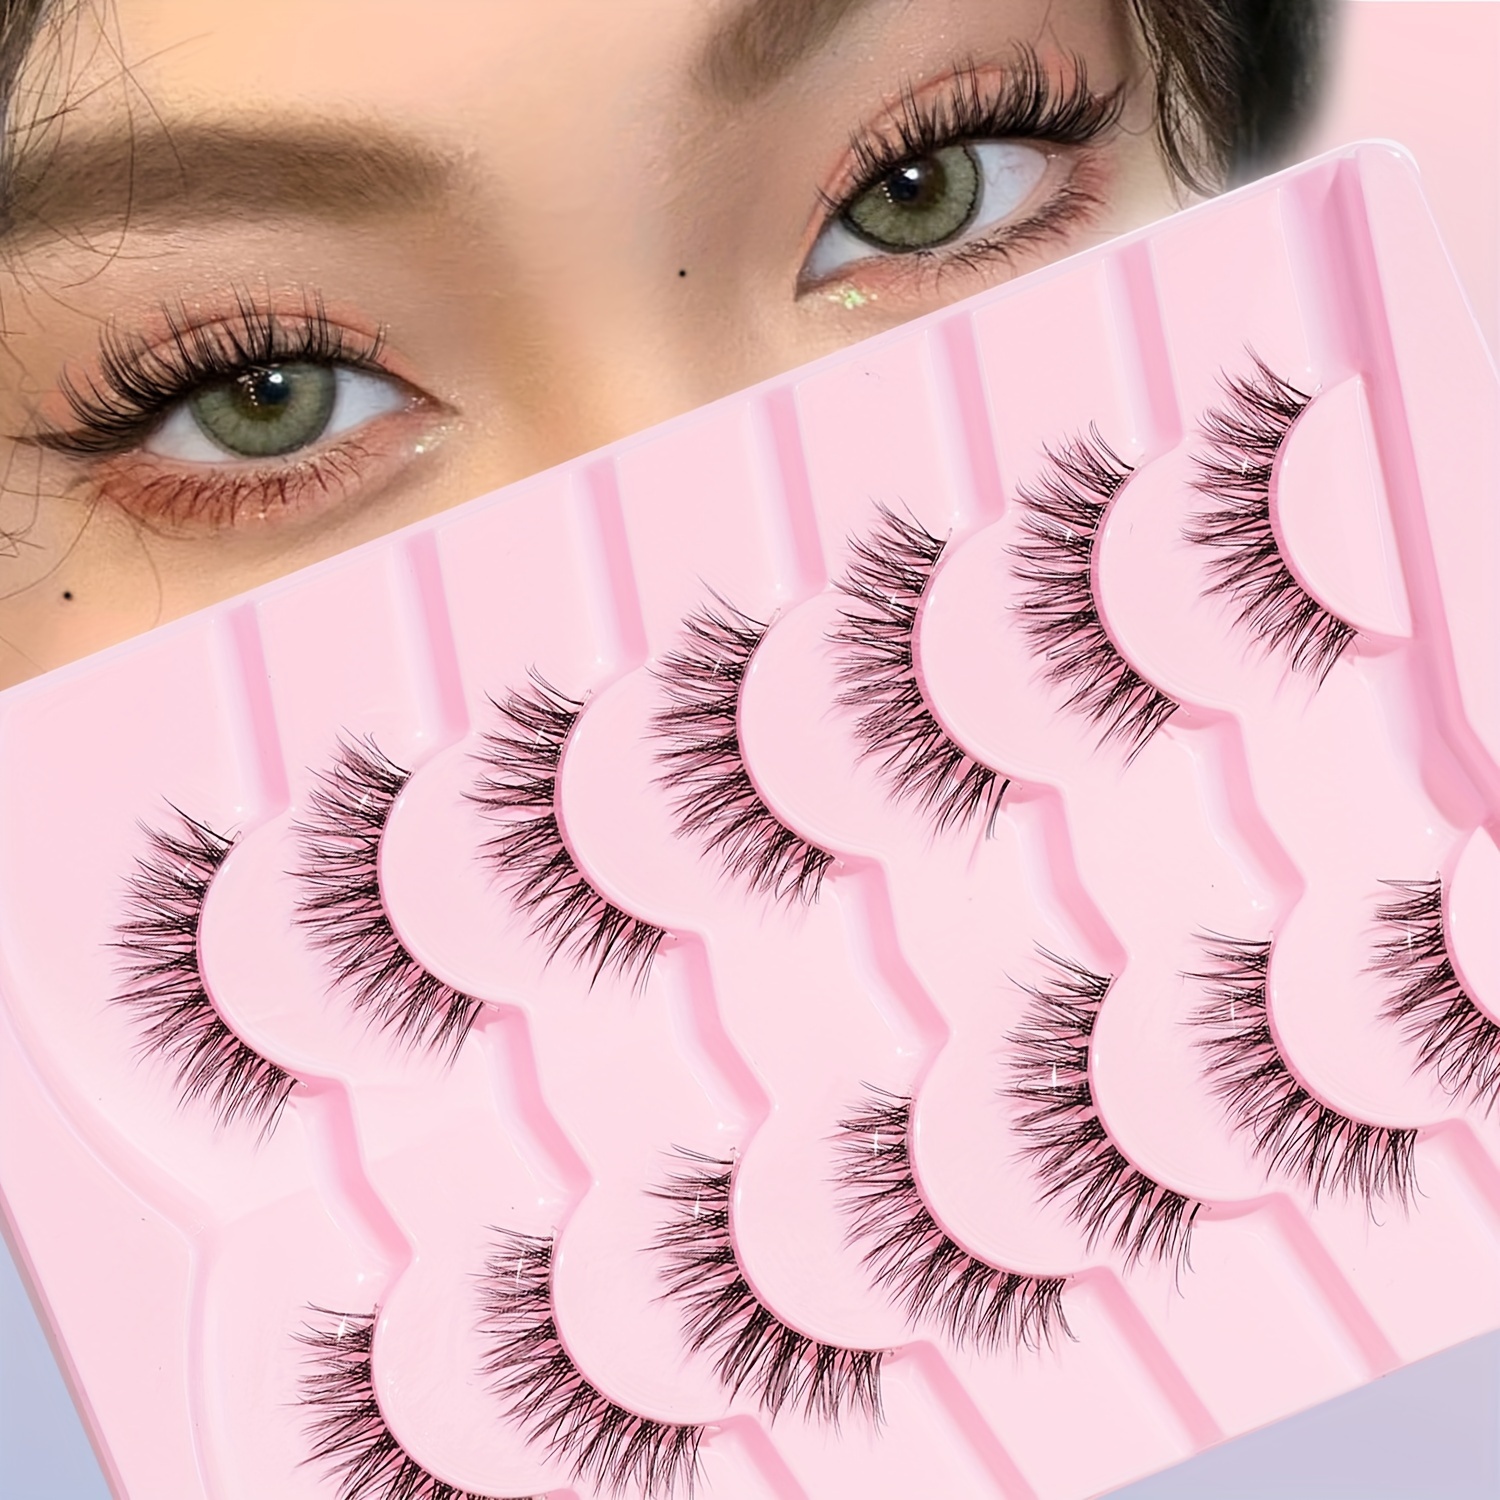 

Hypoallergenic Natural Long Flare Fish Tail False Eyelashes, 7 Pairs Transparent Band Soft Faux Lashes For Daily & Date Makeup